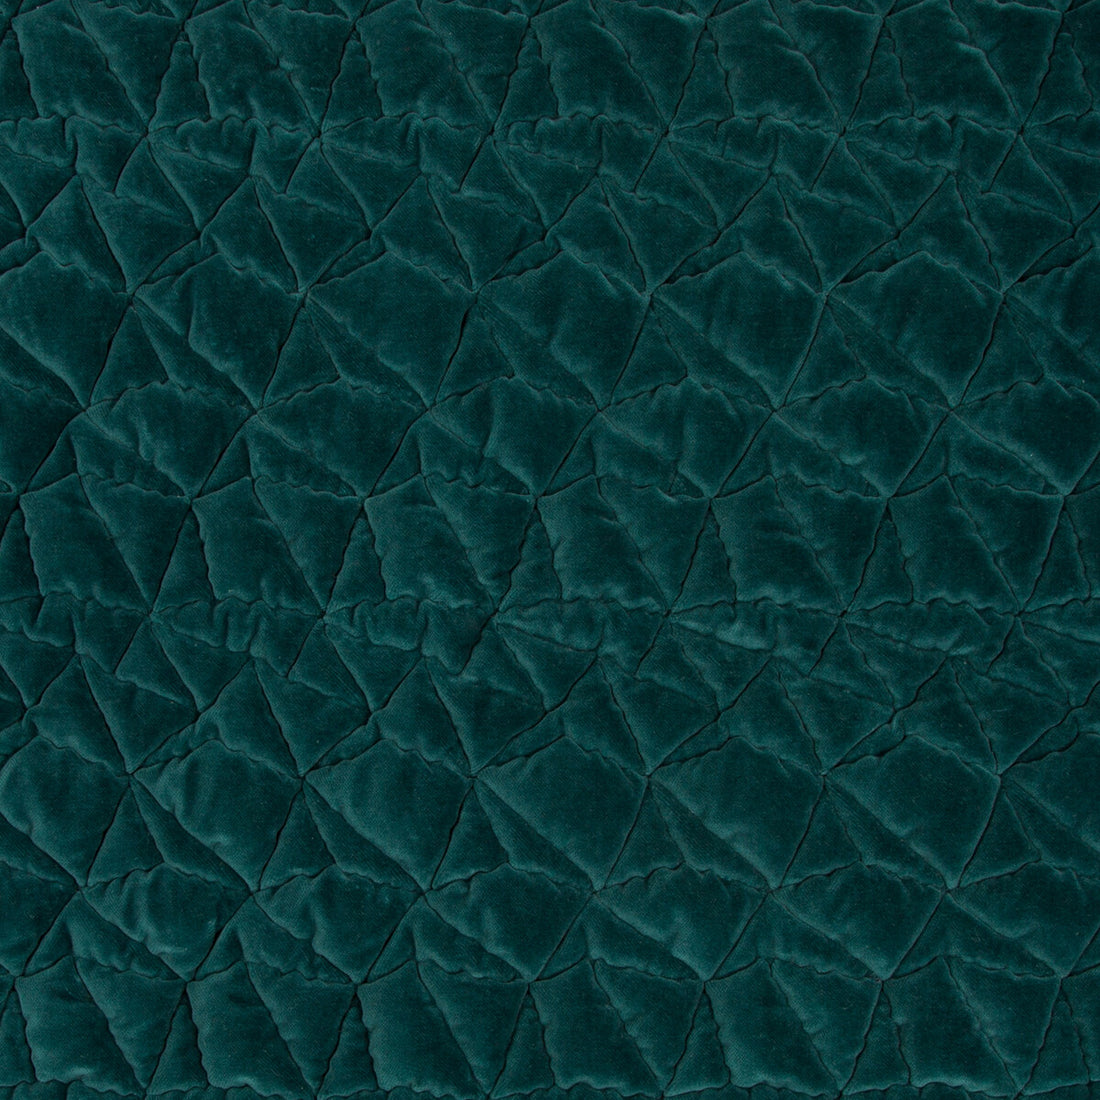 Taking Shape fabric in teal color - pattern 34922.35.0 - by Kravet Couture in the Modern Tailor collection